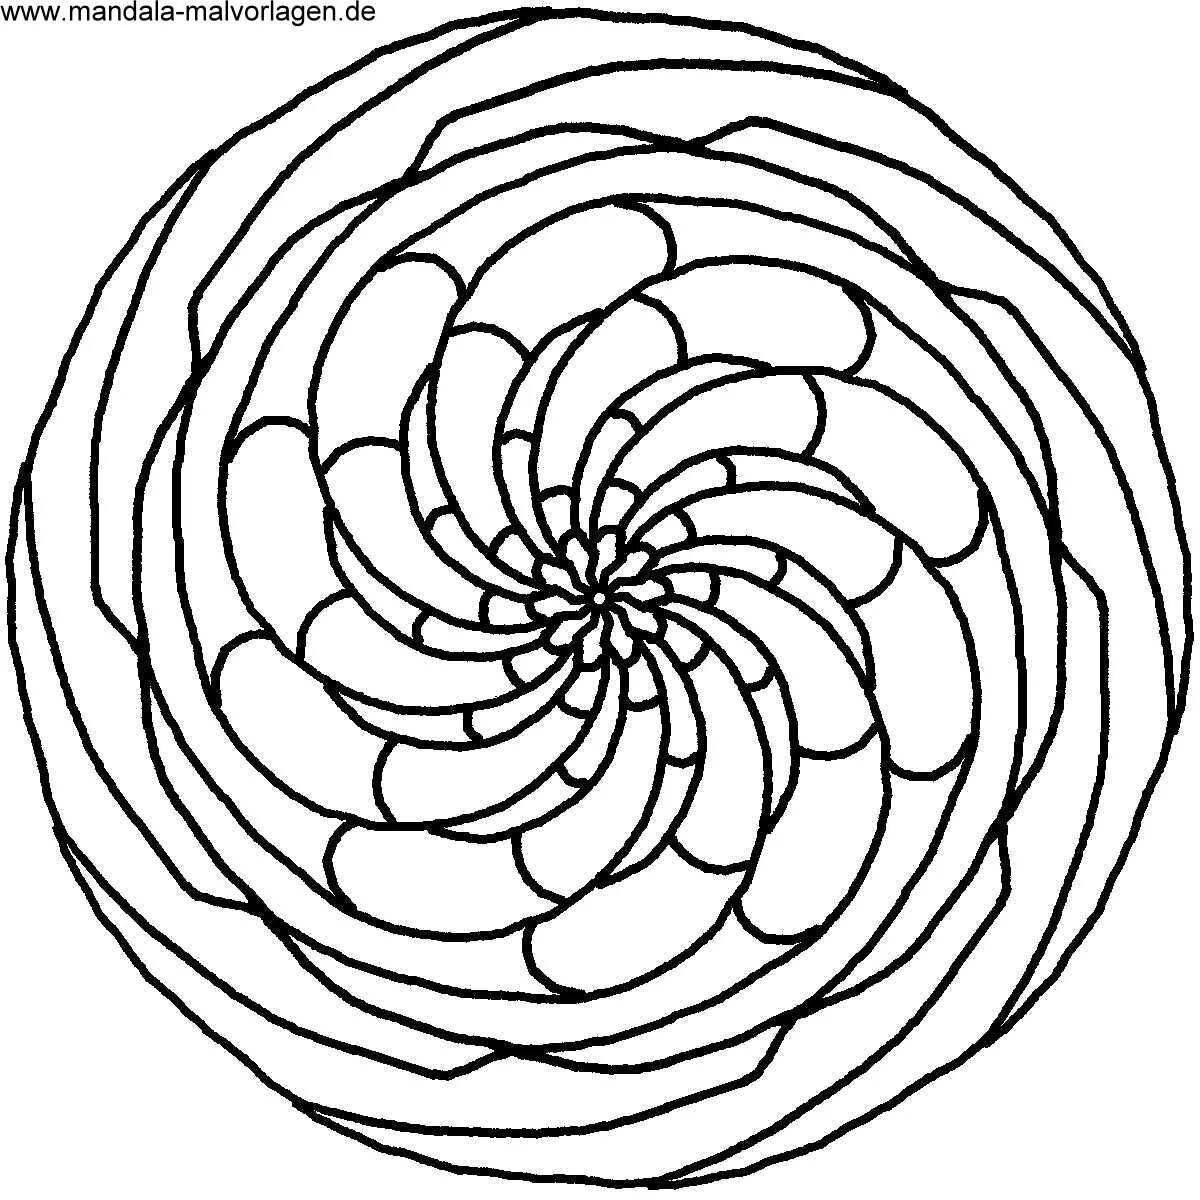 Inspiring betty spiral create coloring page